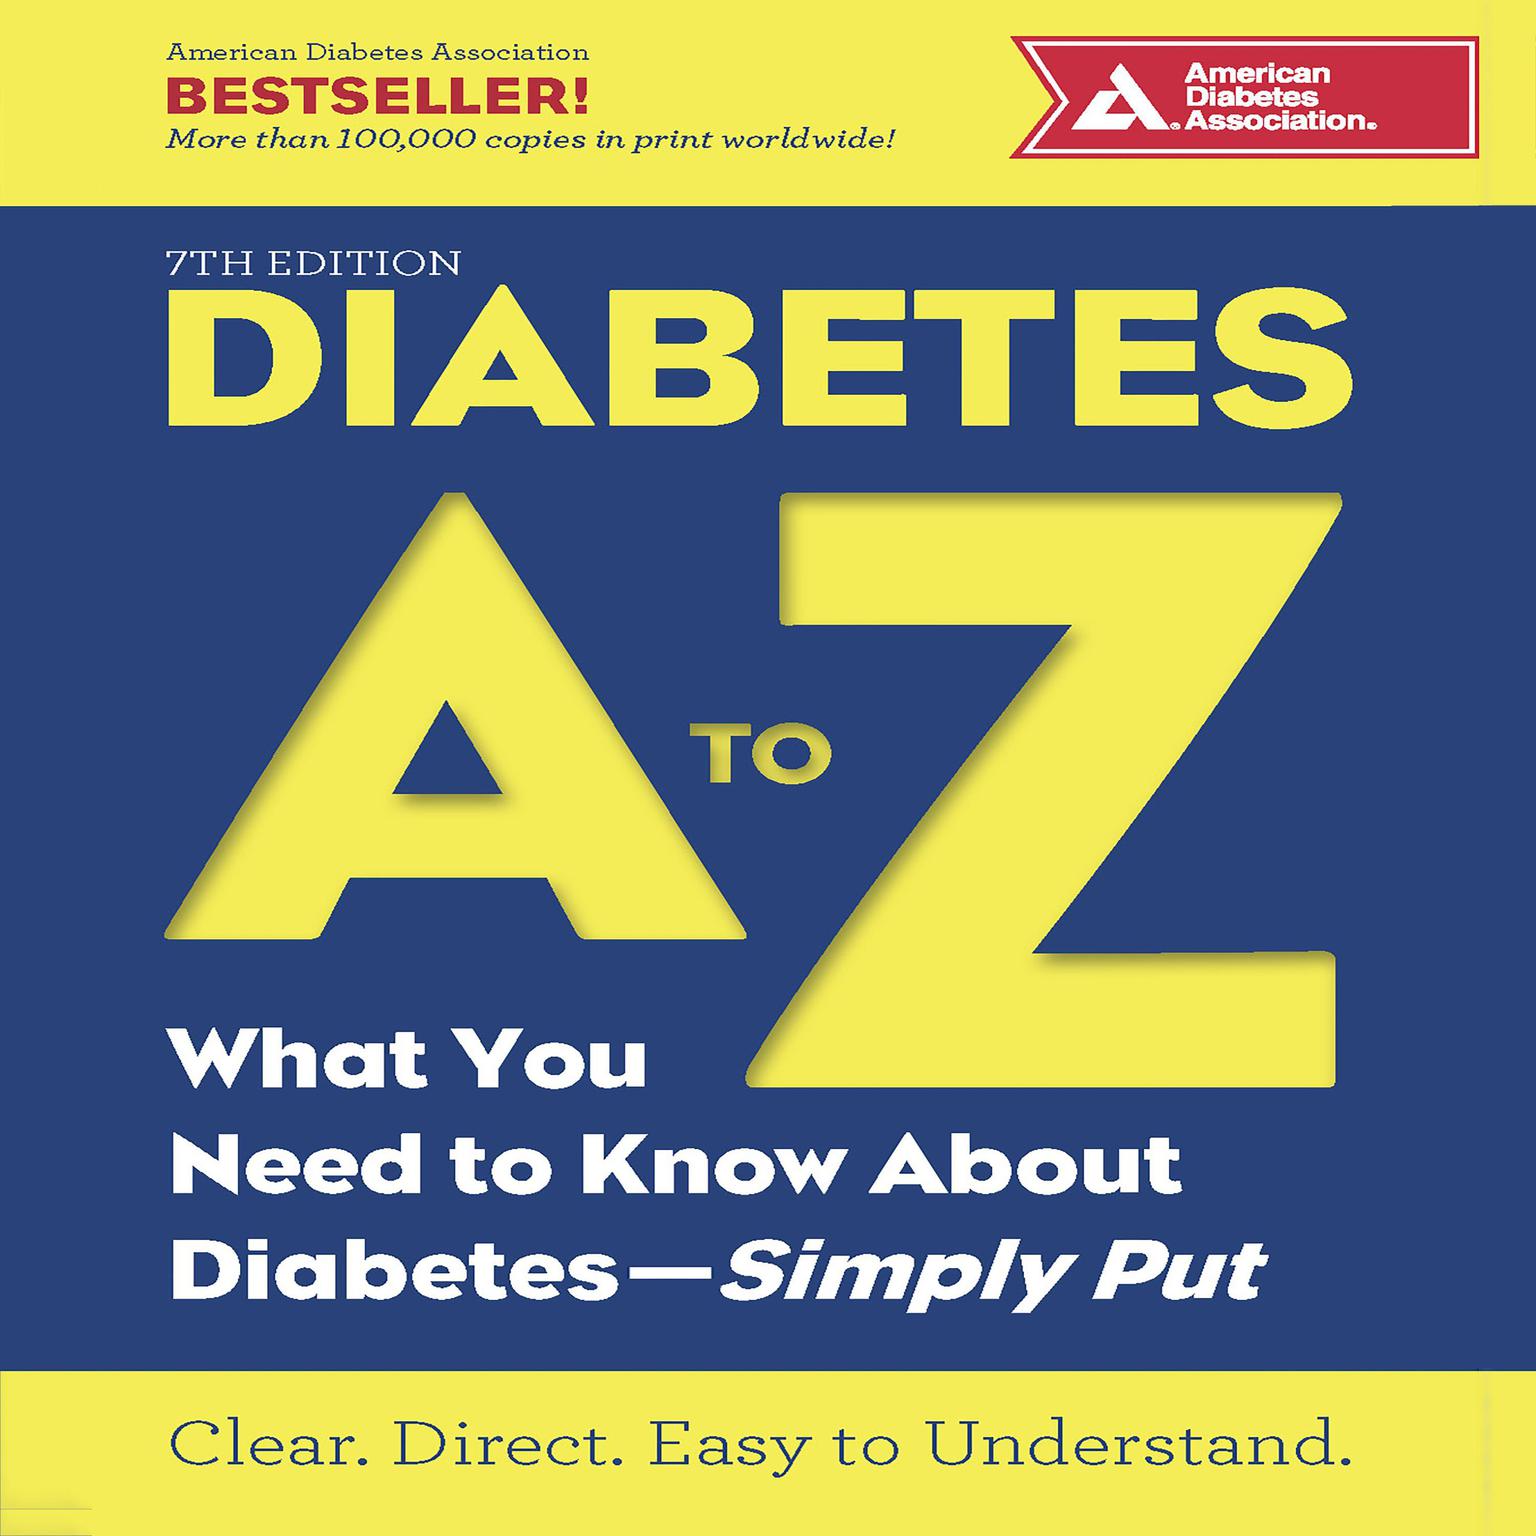 Diabetes A to Z: What You Need to Know about Diabetes—Simply Put Audiobook, by American Diabetes Association